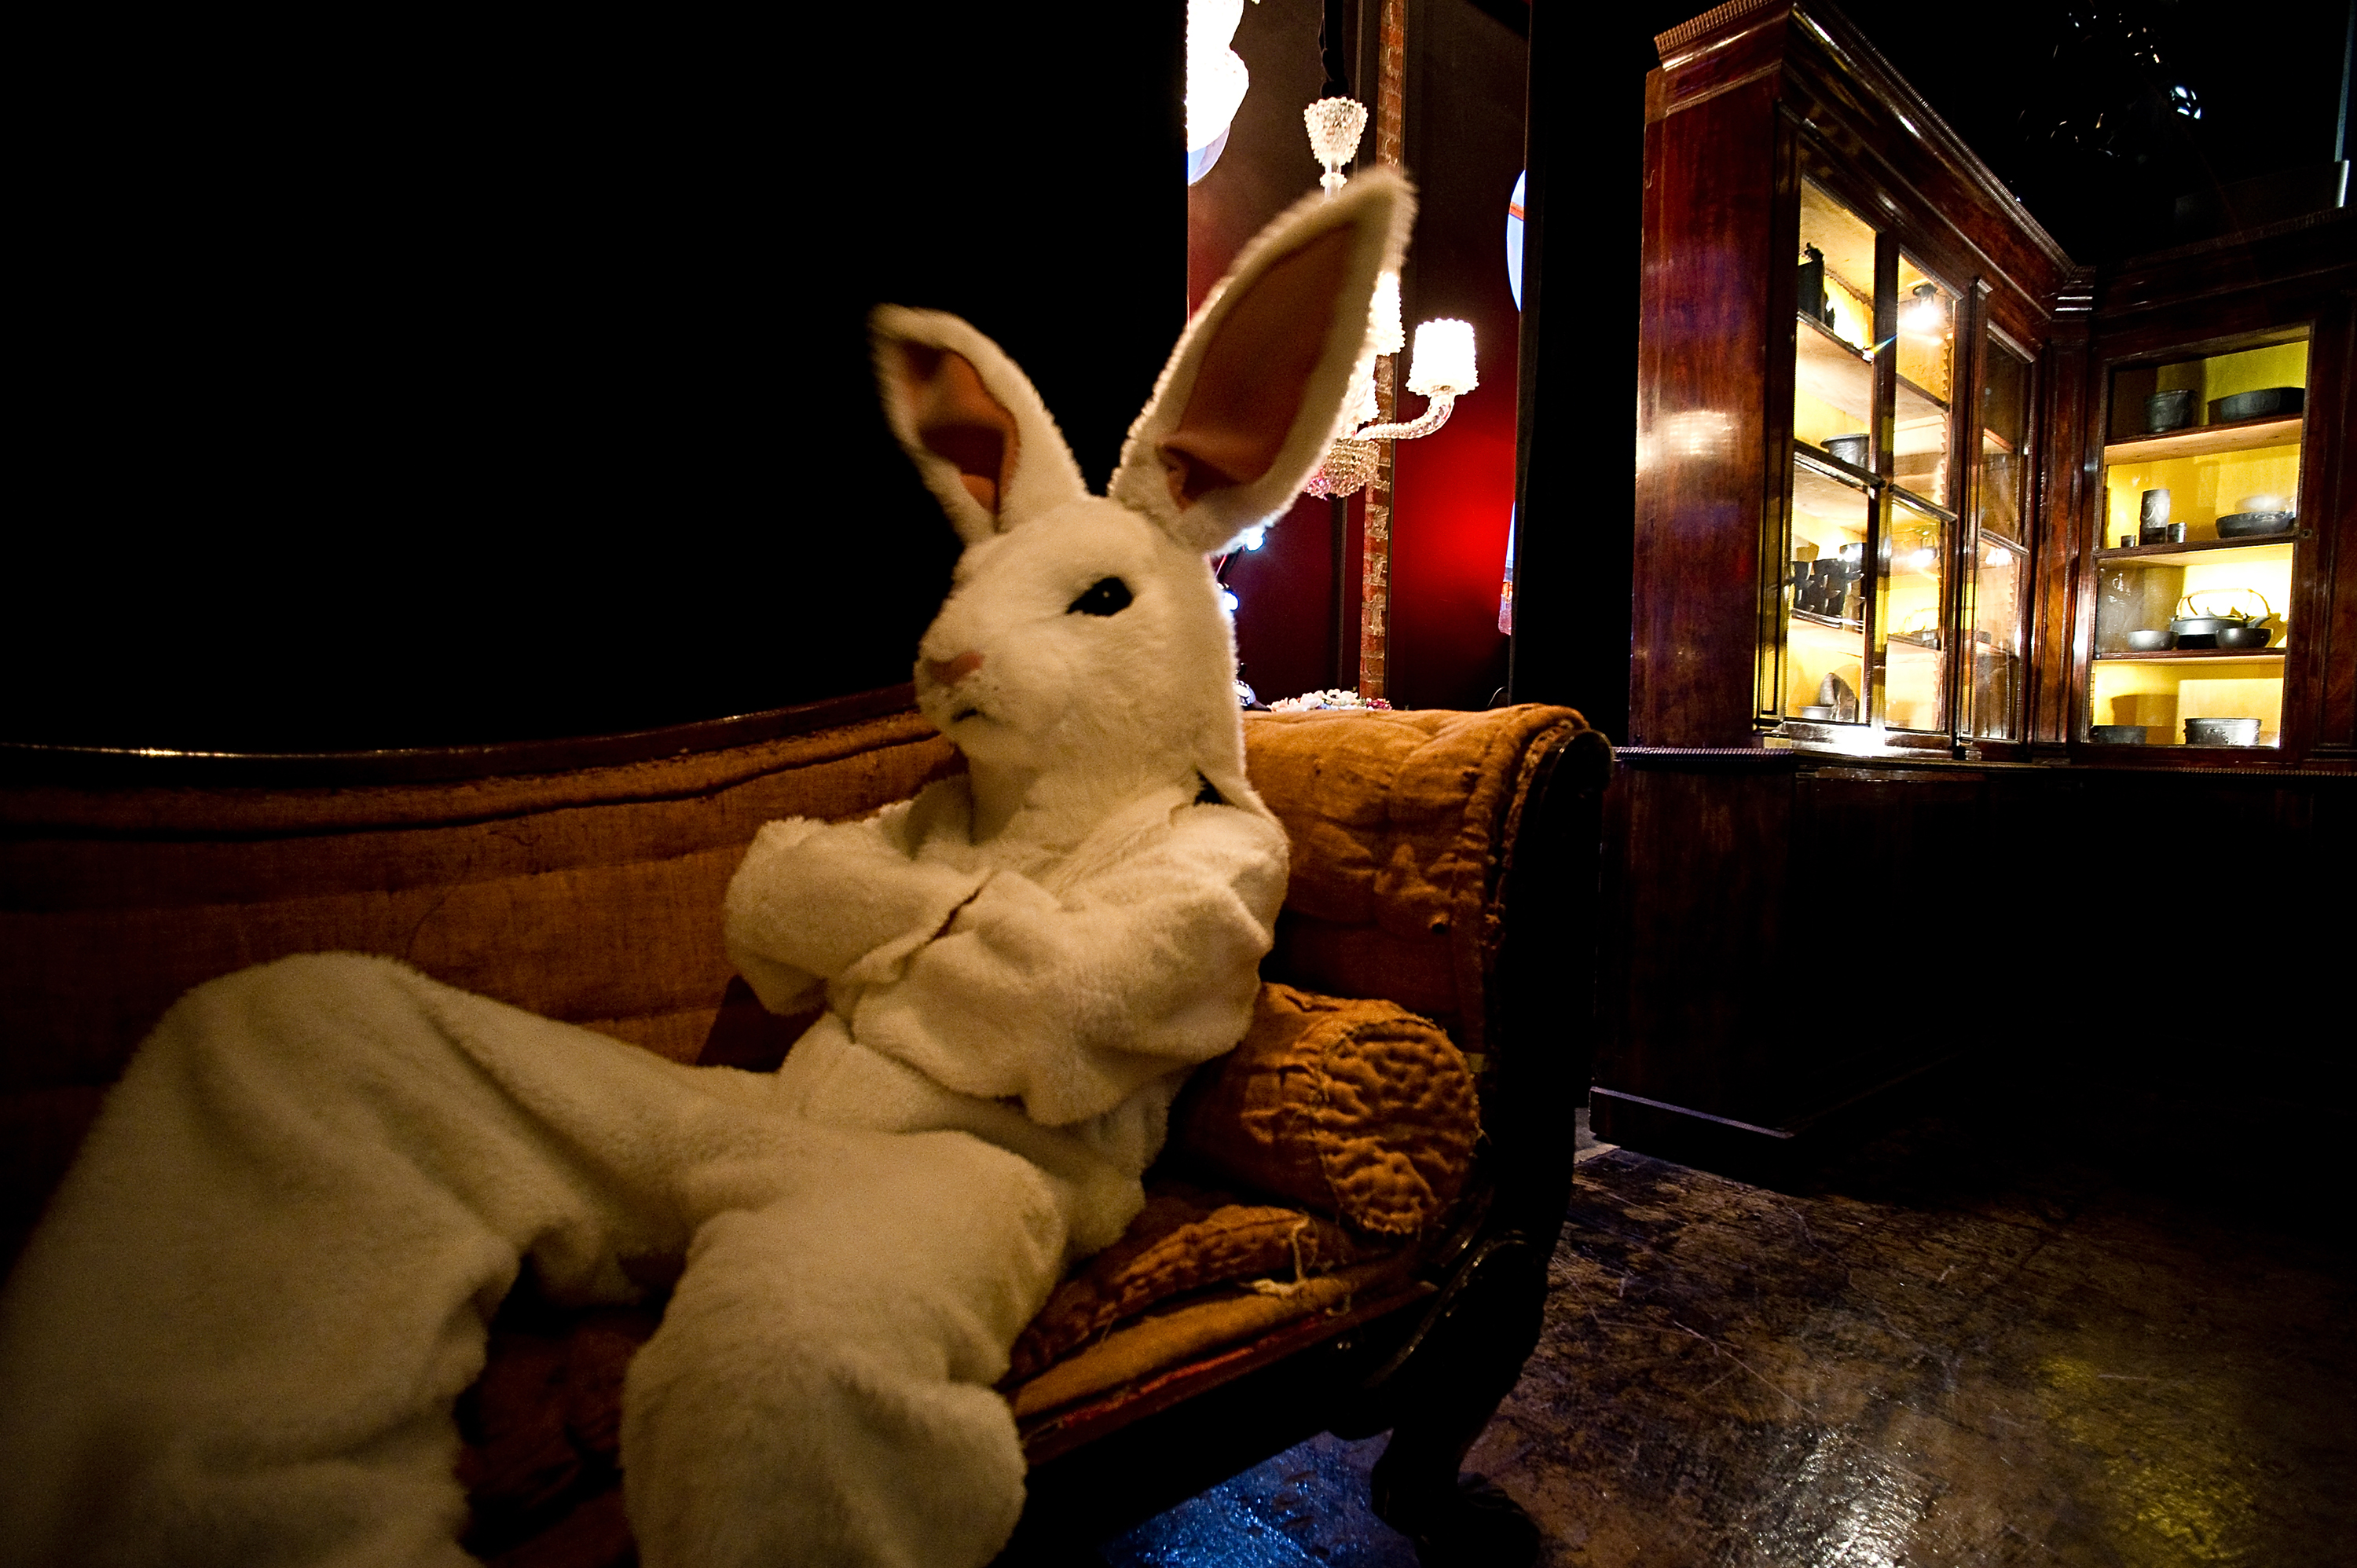 A person in a large white rabbit costume with long ears is sitting on an antique couch in a dark, cozy room, with their arms crossed. There are lit display shelves behind them.